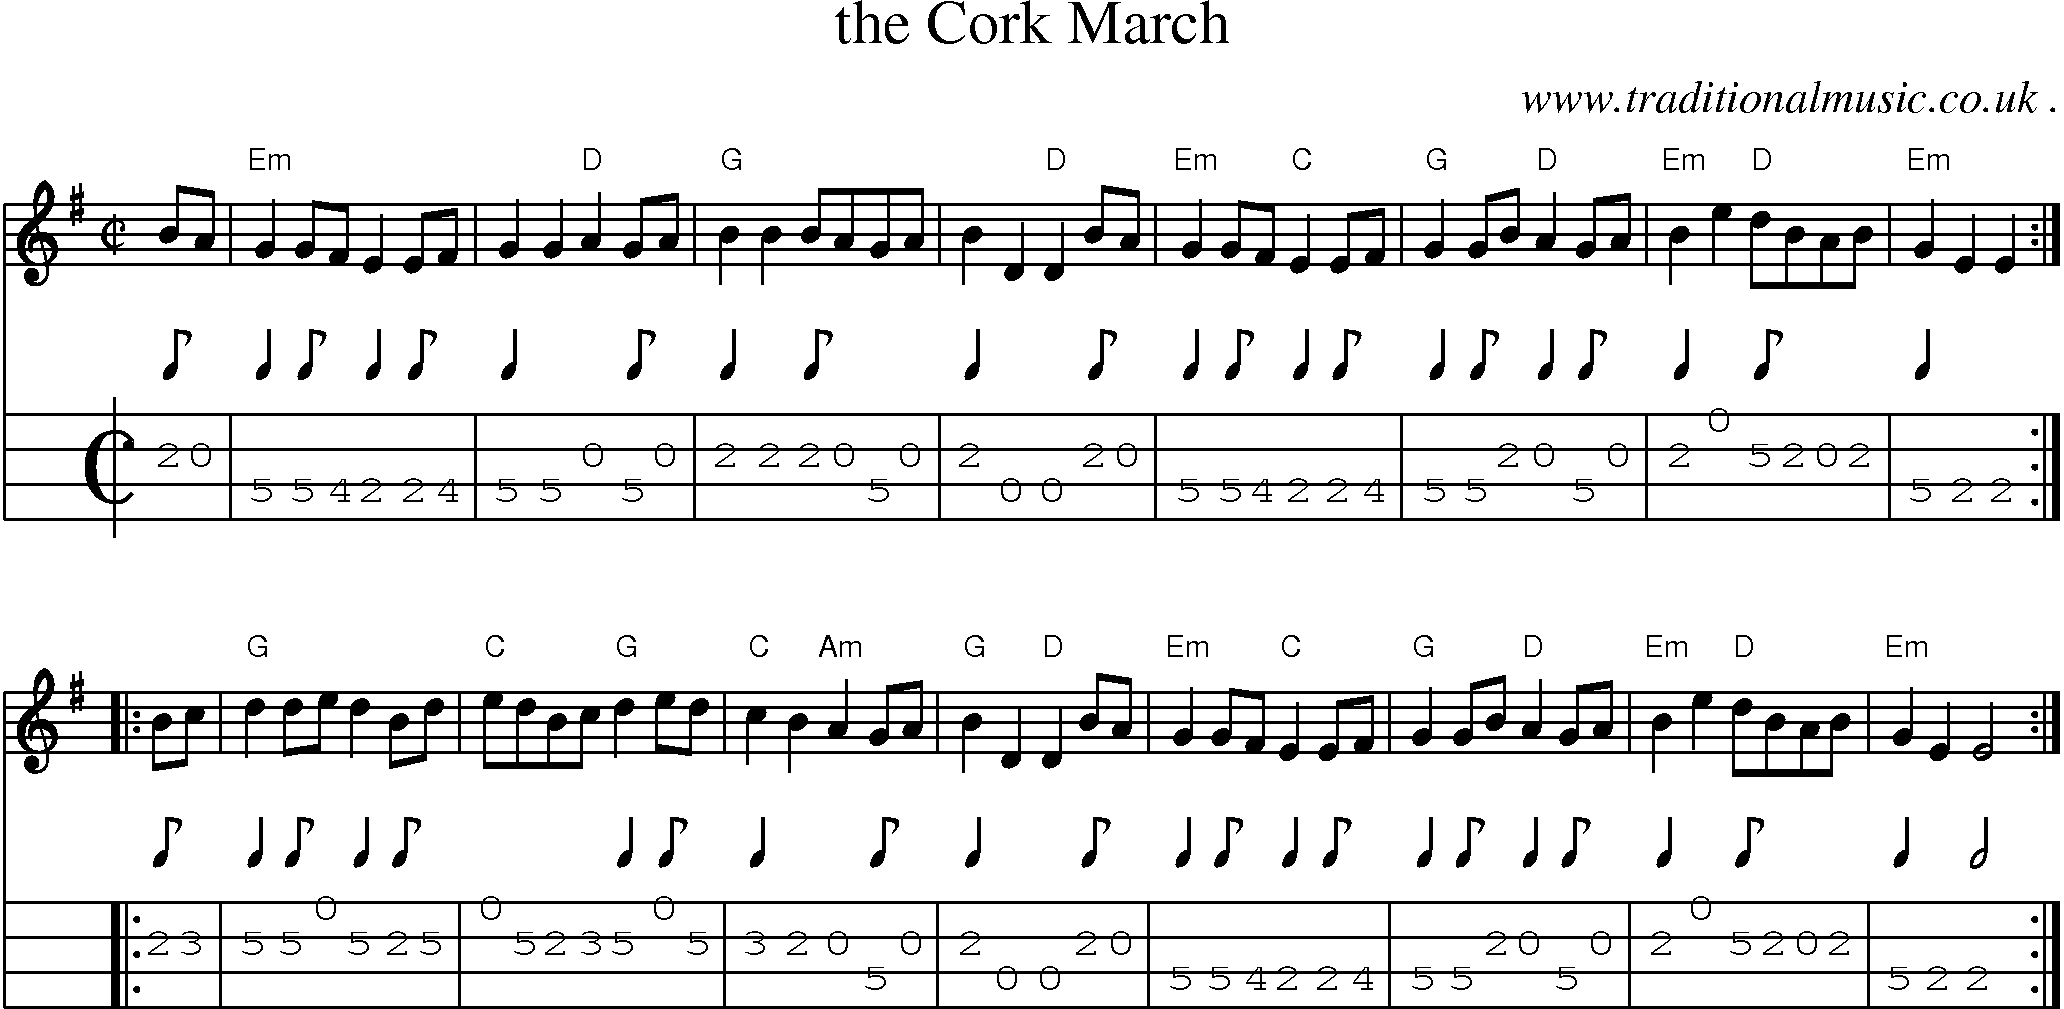 Sheet-music  score, Chords and Mandolin Tabs for The Cork March